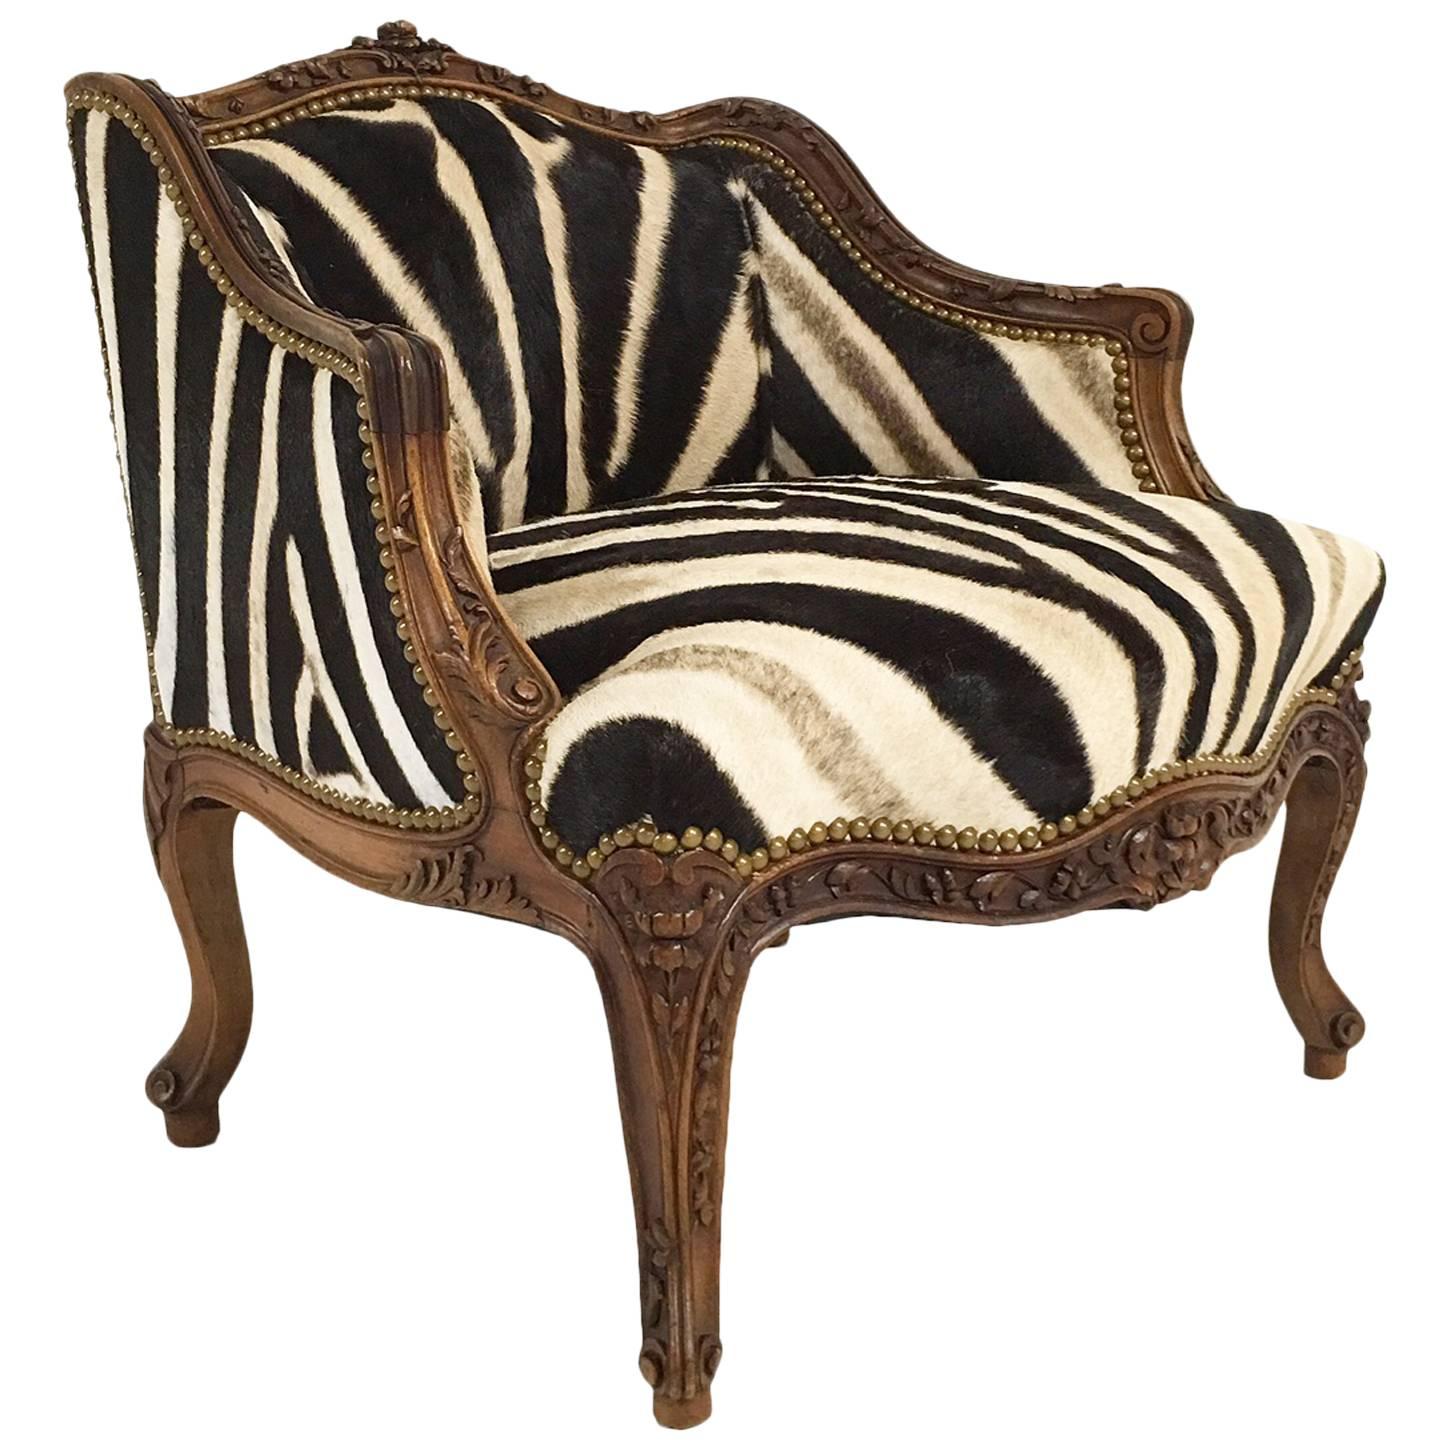 Small Vintage Carved Chair in Zebra Hide